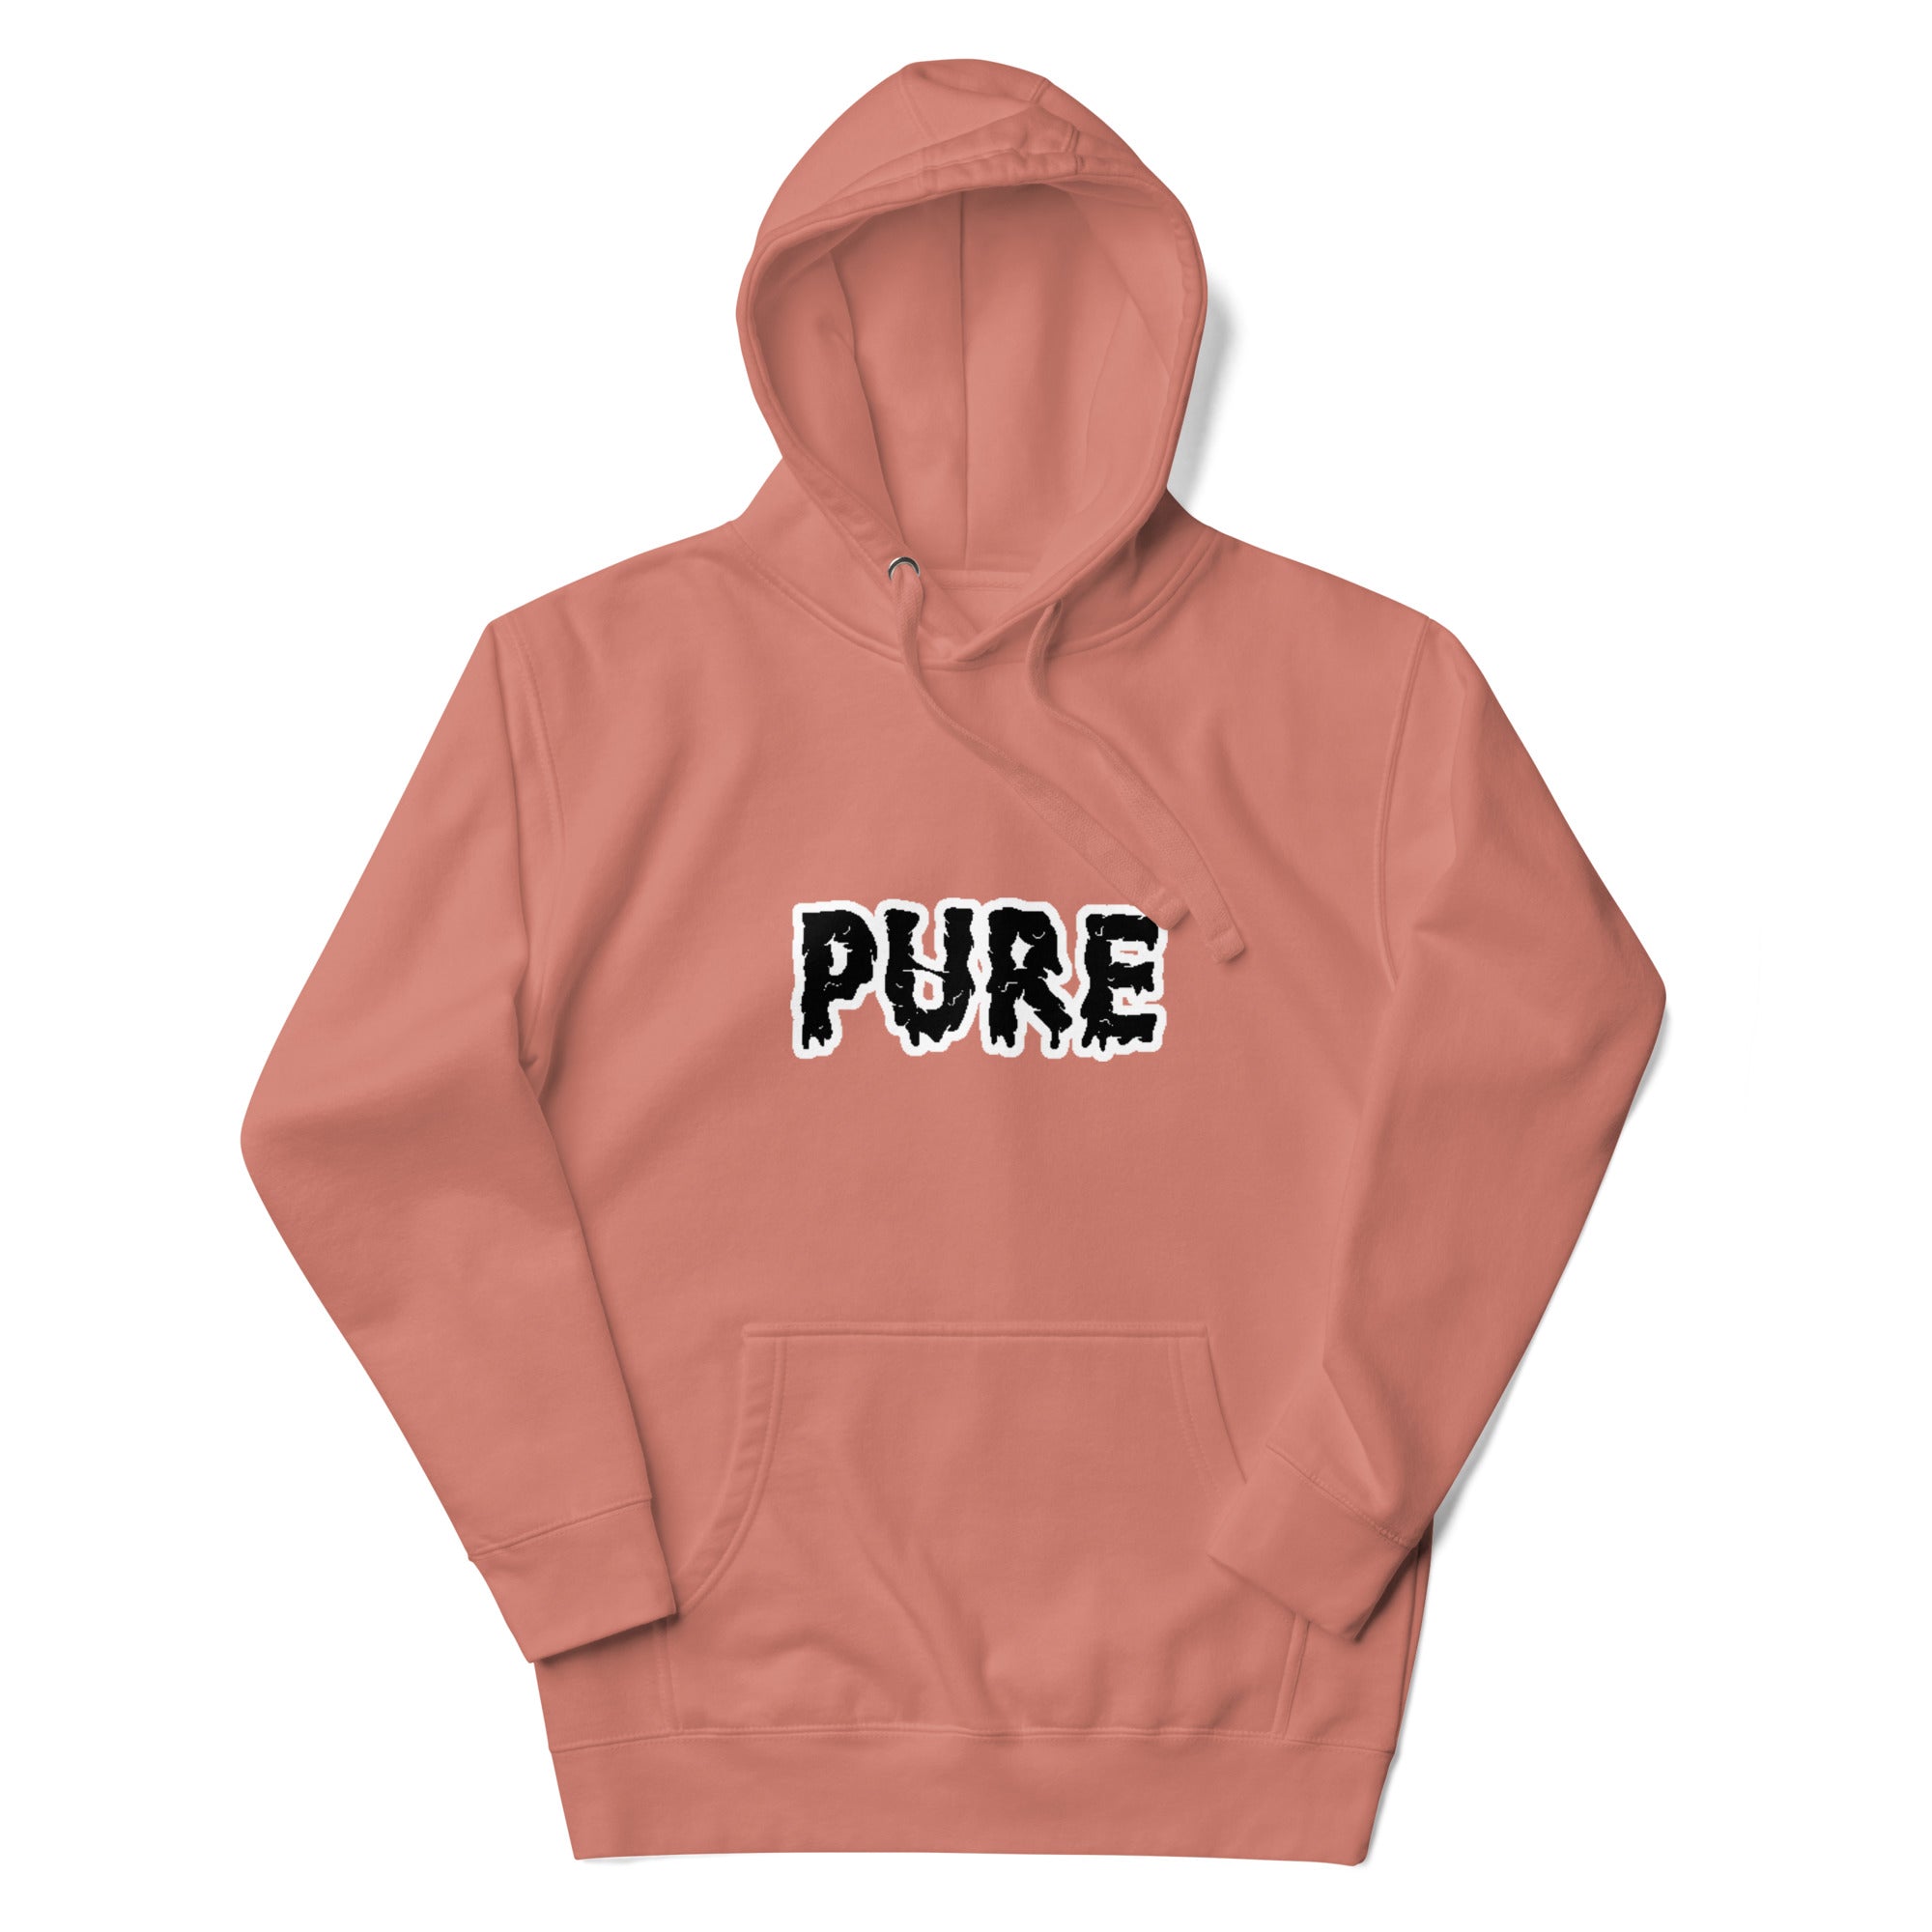 PURE Words Hoodie dusty rose, black and white.